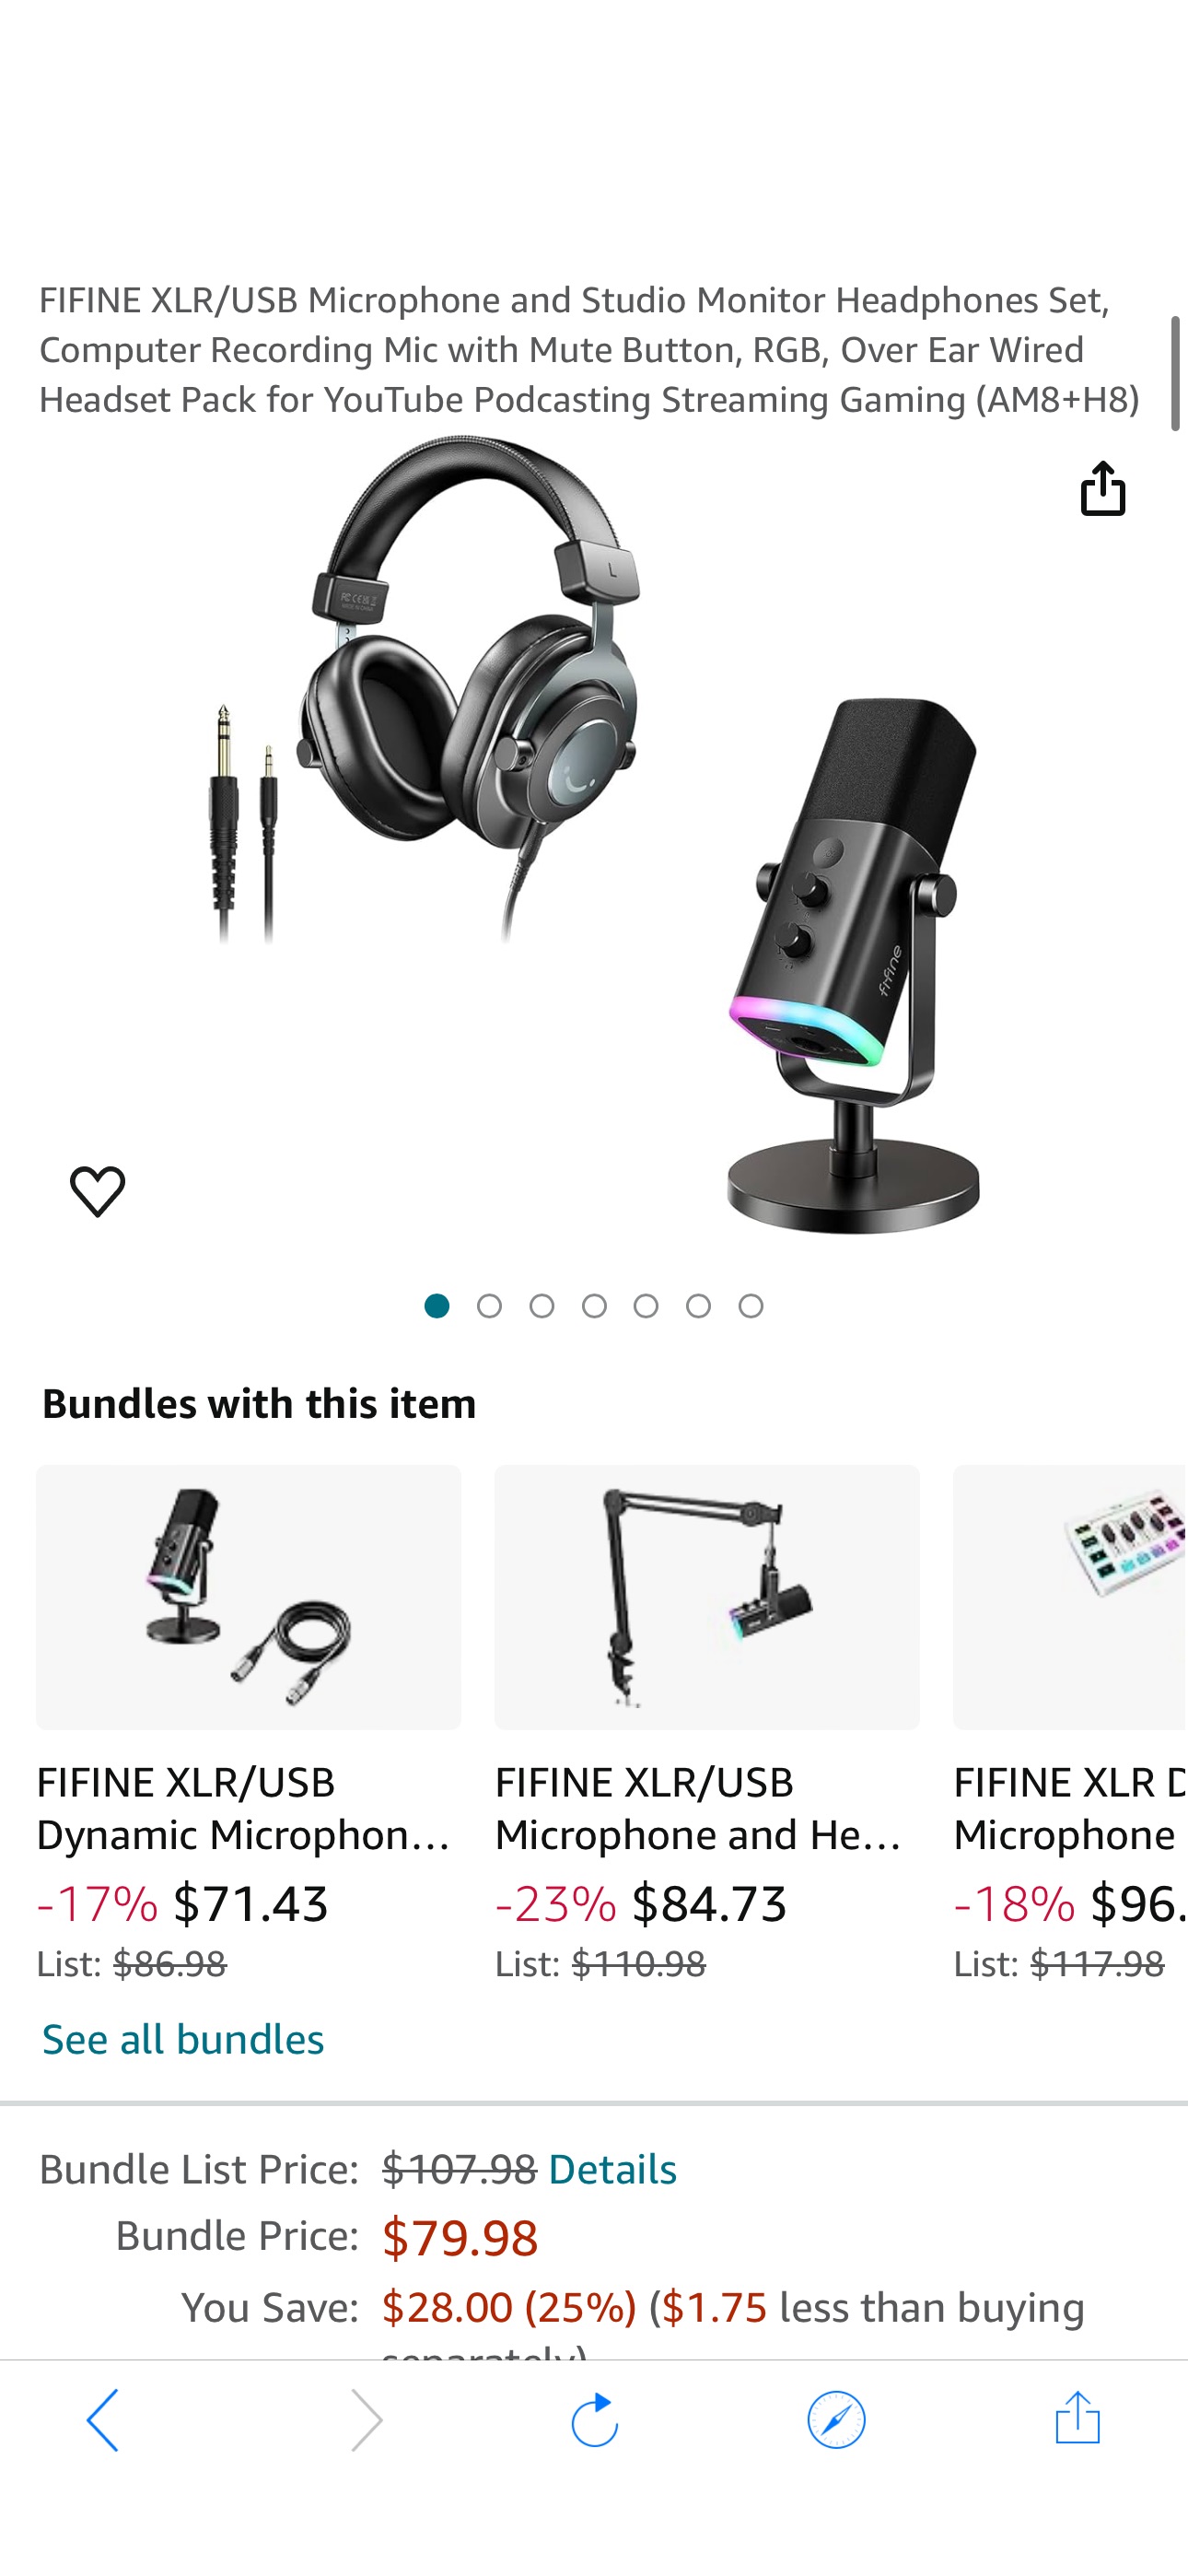 Amazon.com: FIFINE XLR/USB Microphone and Studio Monitor Headphones Set, Computer Recording Mic with Mute Button, RGB, Over Ear Wired Headset Pack for YouTube Podcasting Streaming Gaming (AM8+H8) : Mu